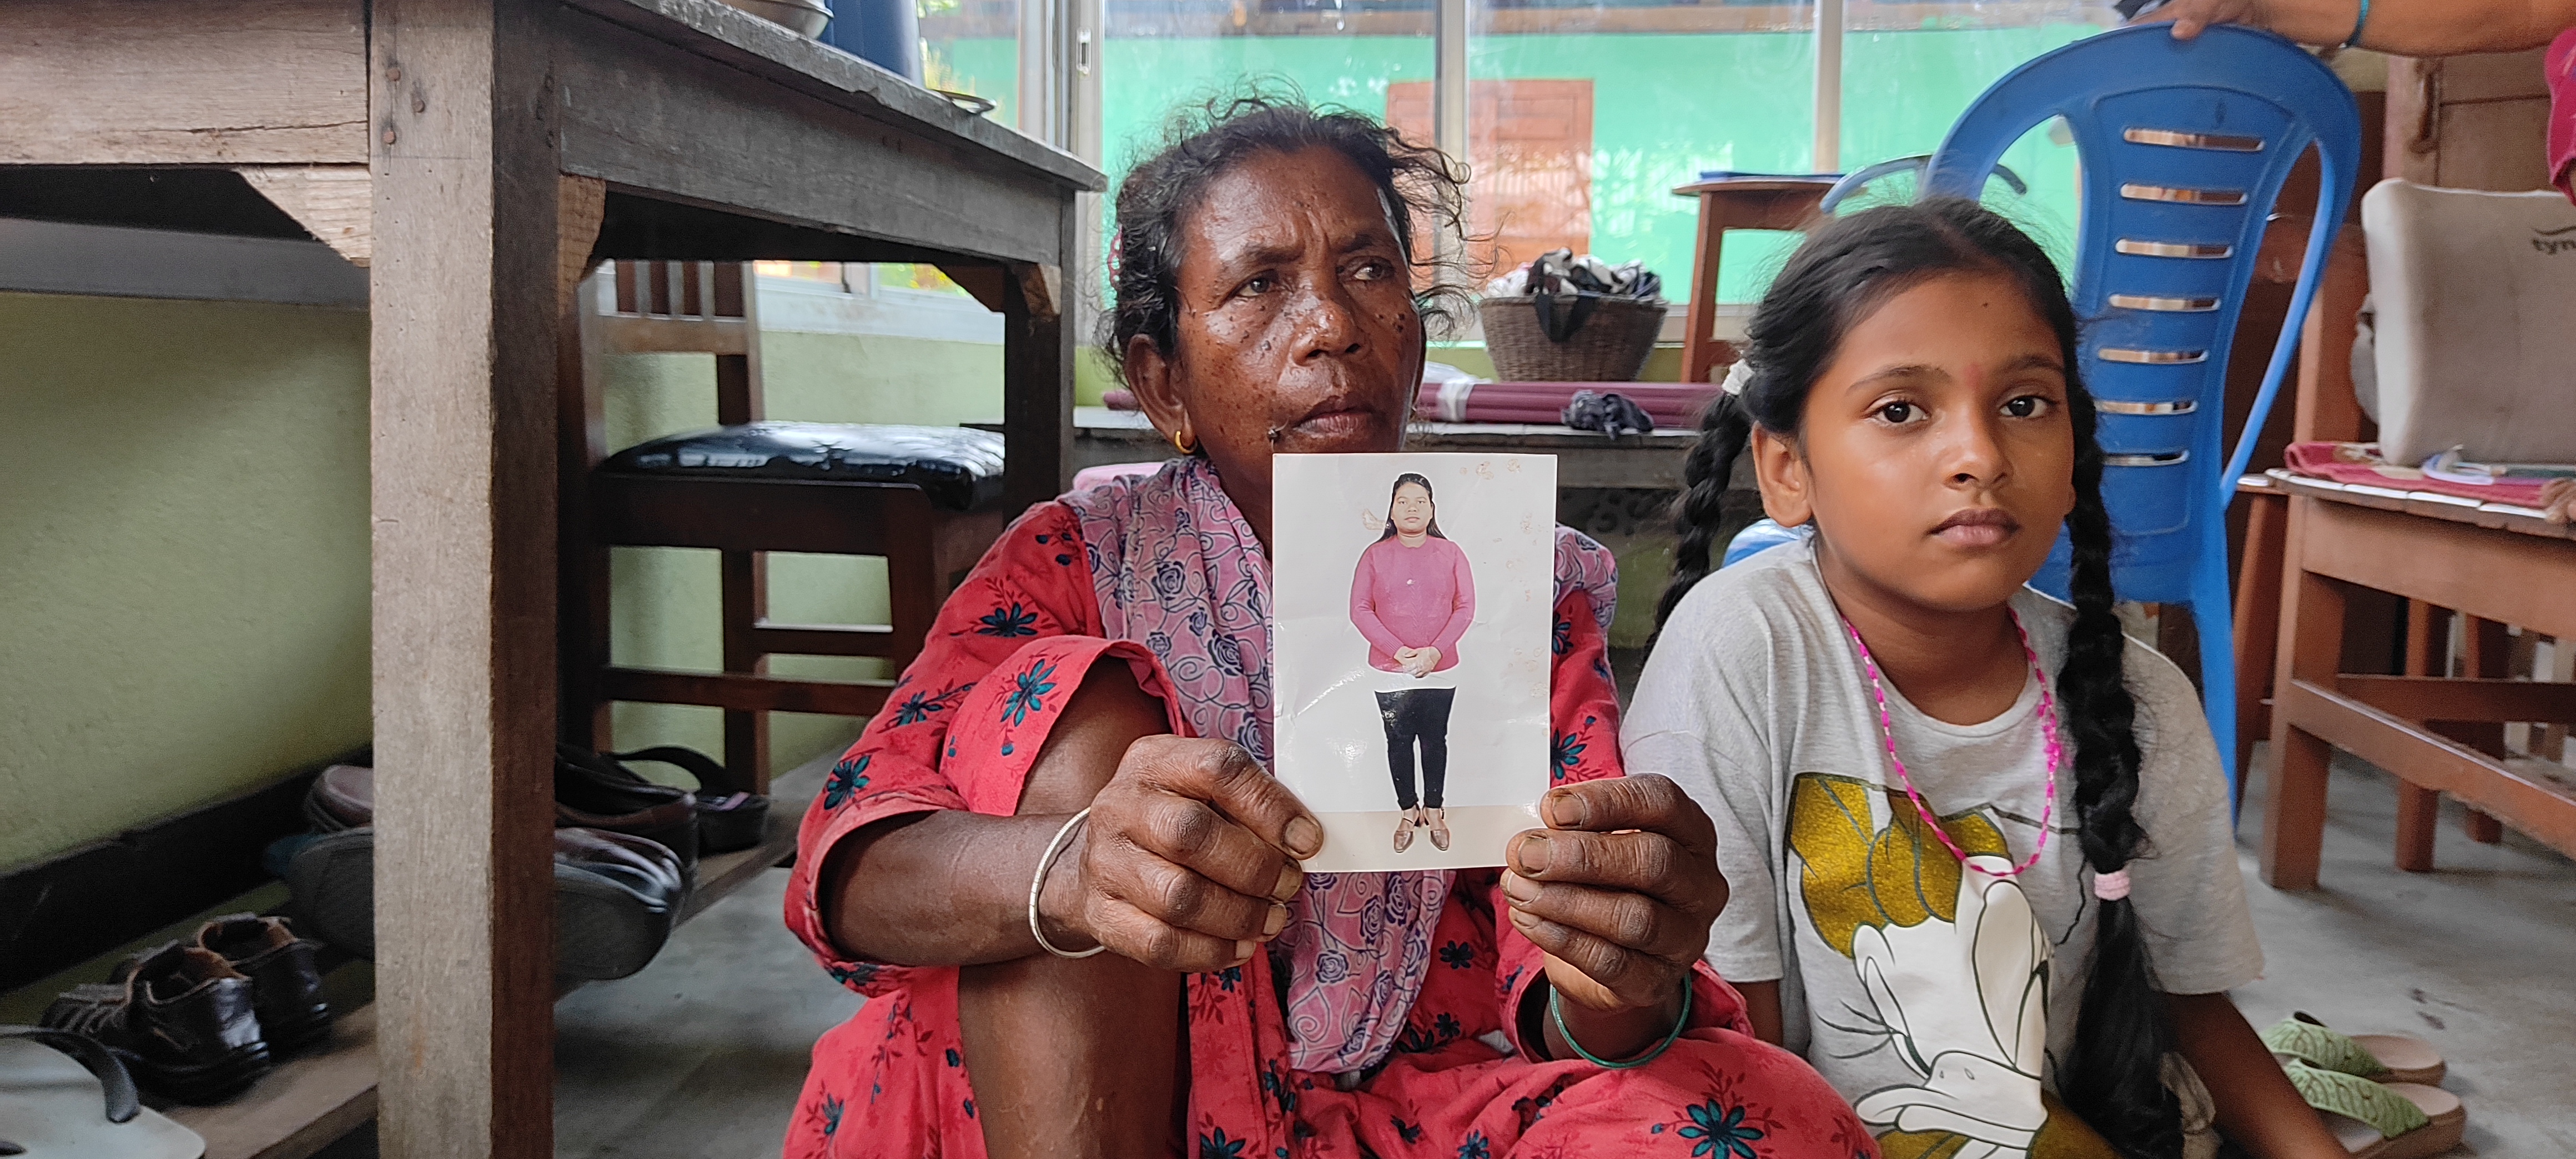 Nepali woman held hostage in Iraq for three years; mother pleads for rescue